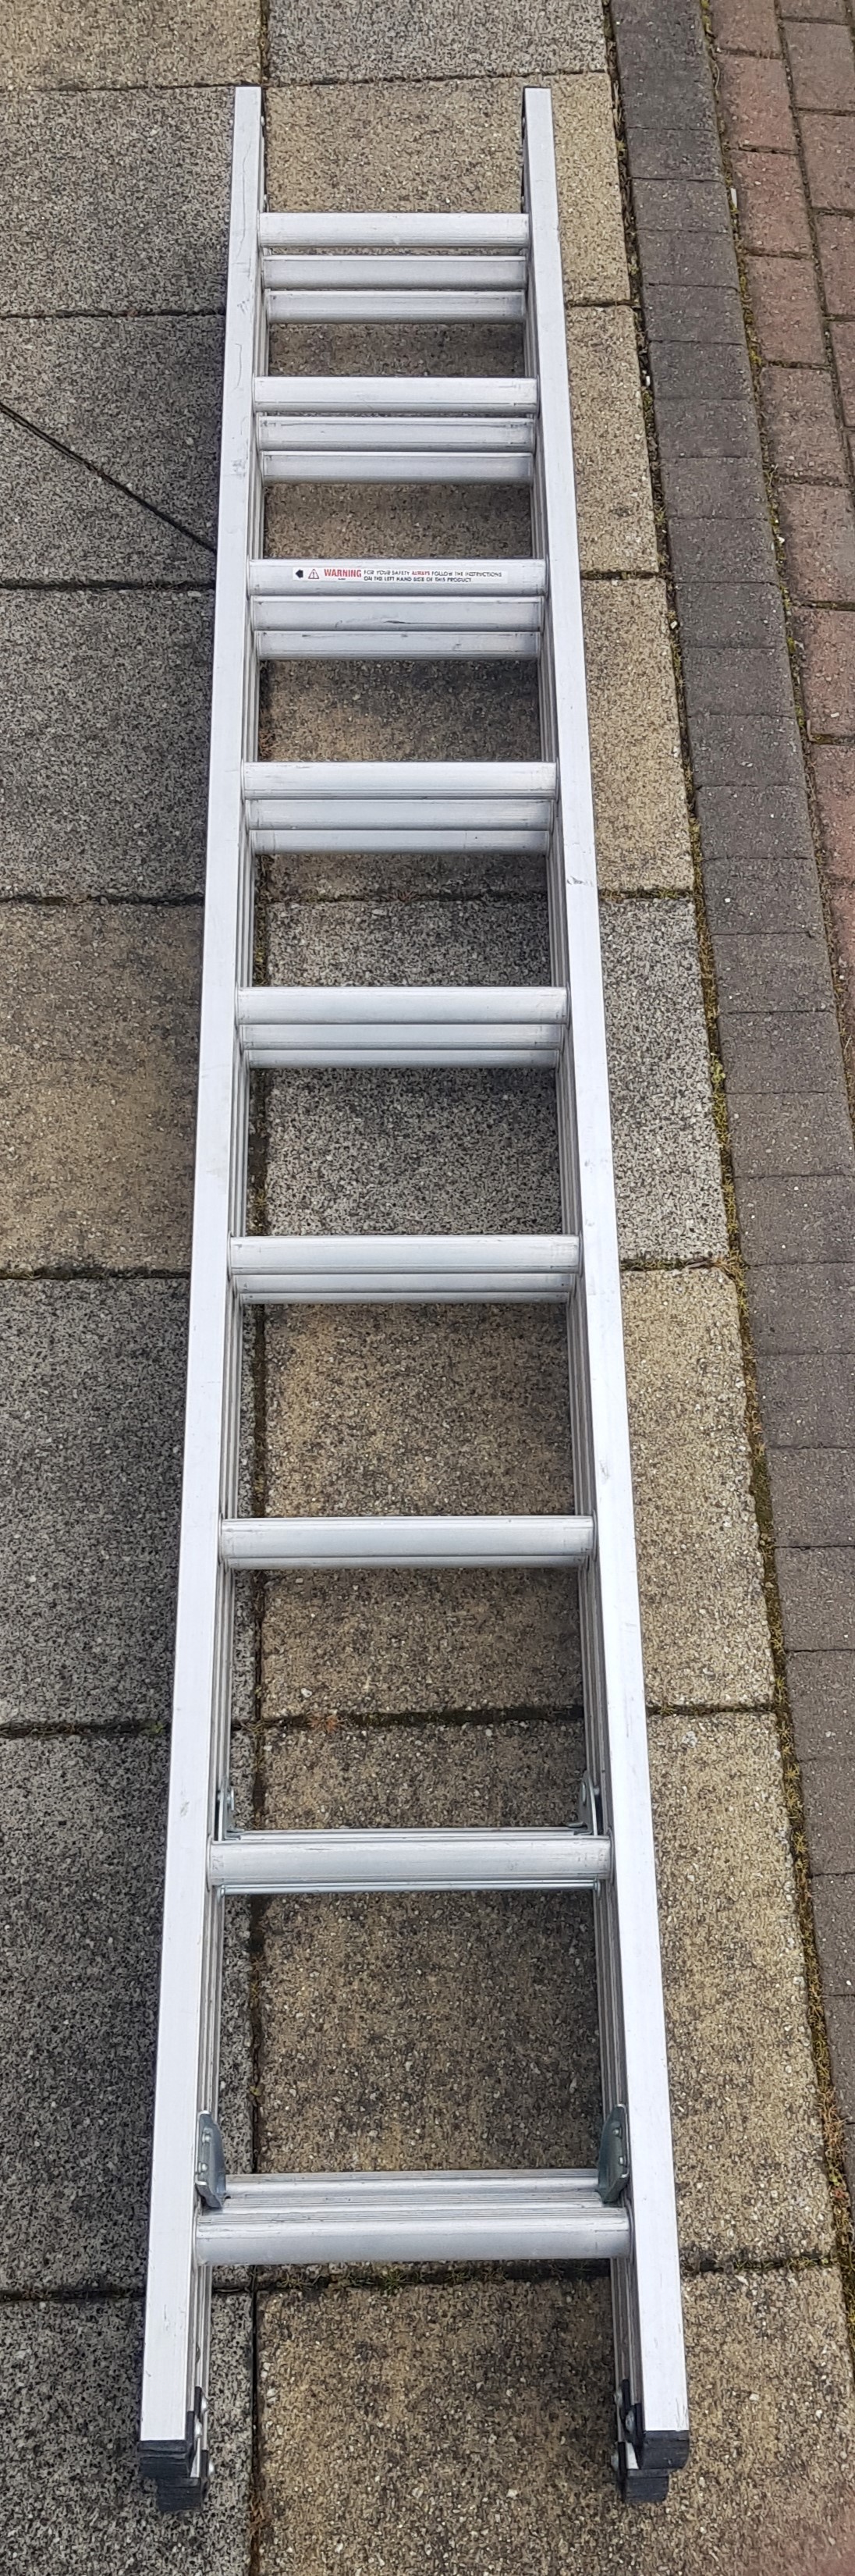 Abr Pro-Triple aluminium extending ladders. length when fully extended - 6 metres.